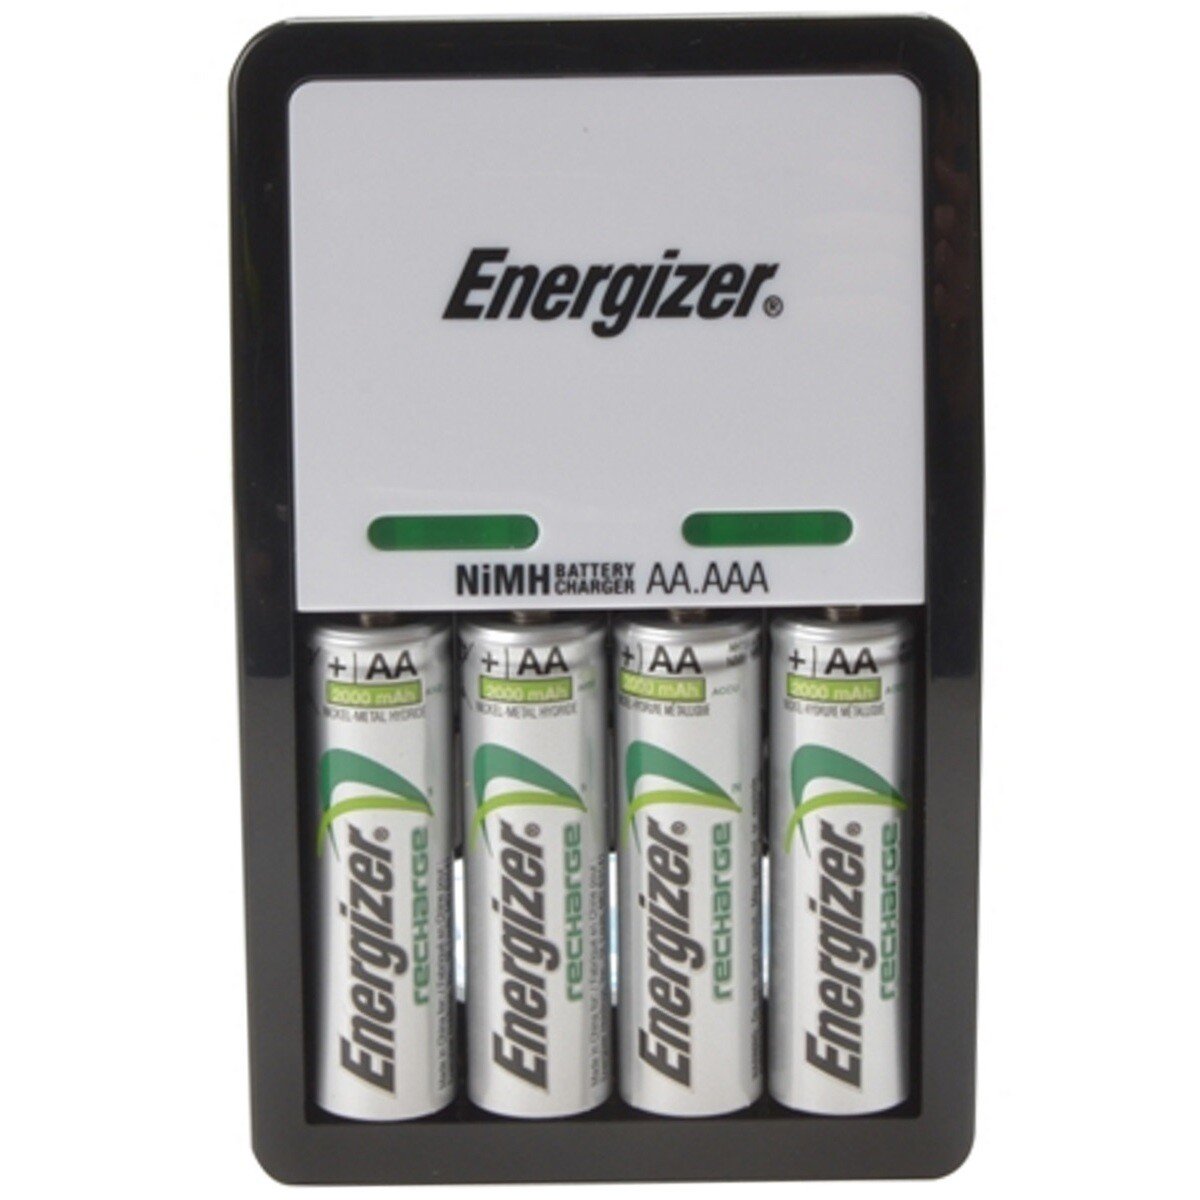 Energizer S5242 Compact Charger with 4 x AA 2000 mAh Batteries Included ENGCOMPAC